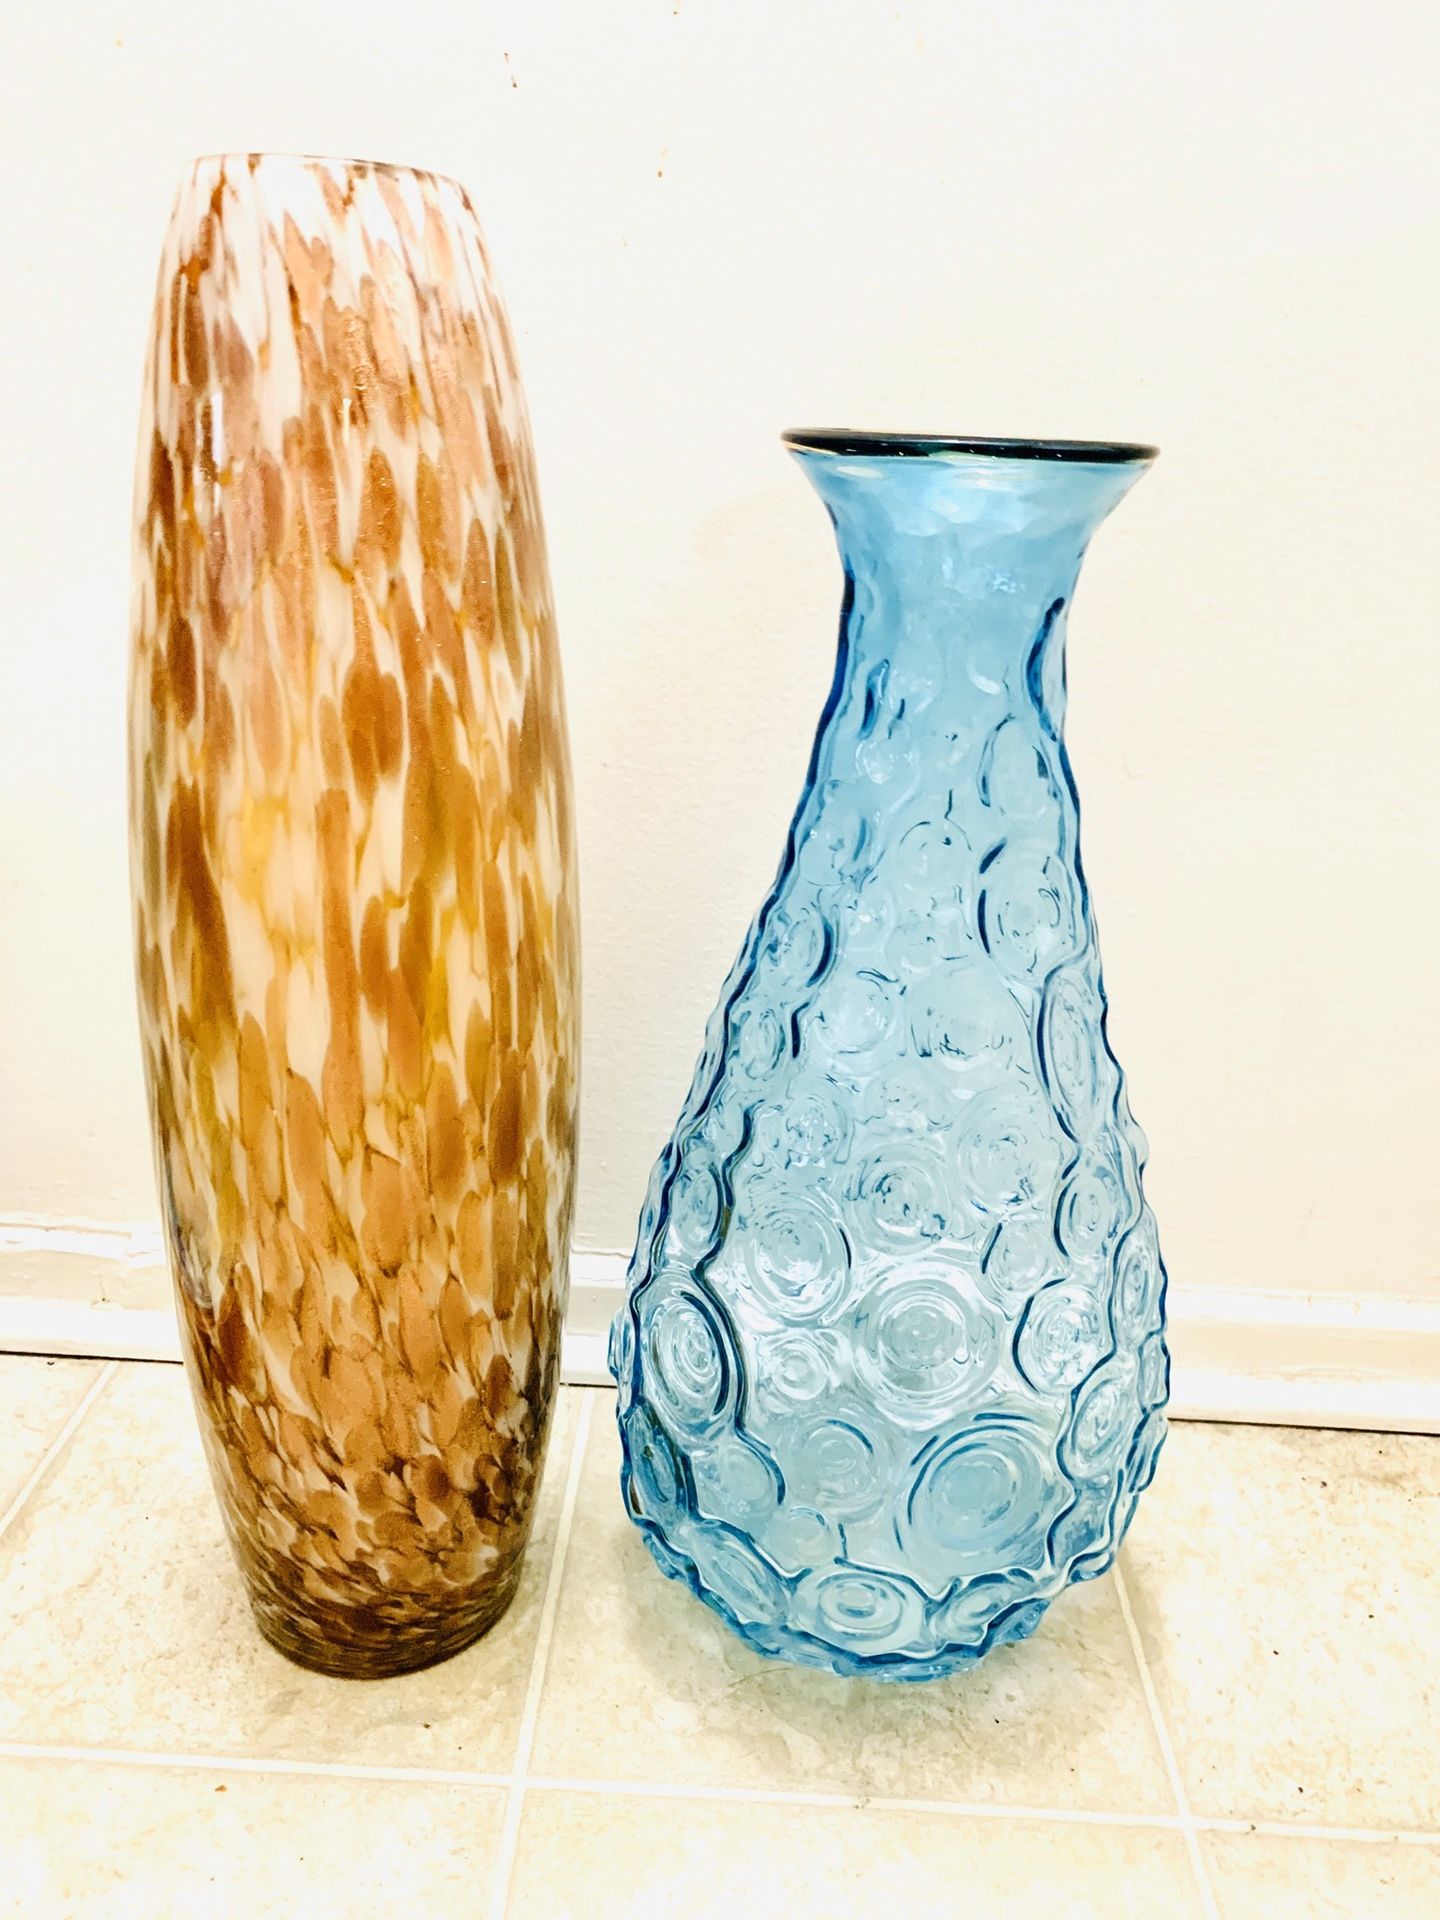 Classy Rustic Home Decorative Glass Cylinder Vases